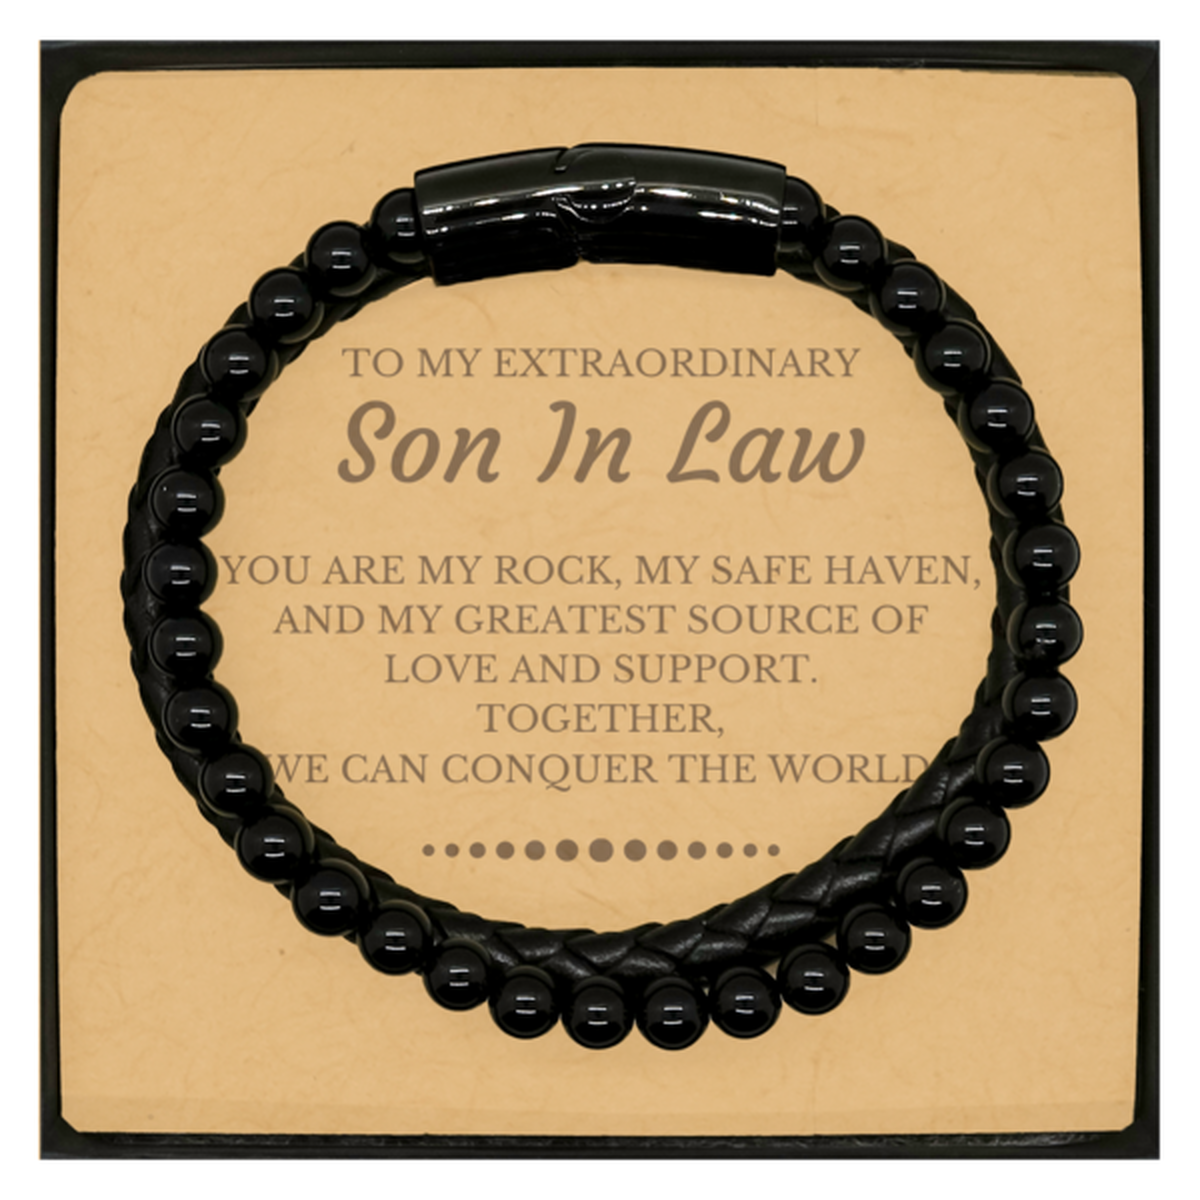 To My Extraordinary Son In Law Gifts, Together, we can conquer the world, Birthday Christmas Stone Leather Bracelets For Son In Law, Christmas Gifts For Son In Law